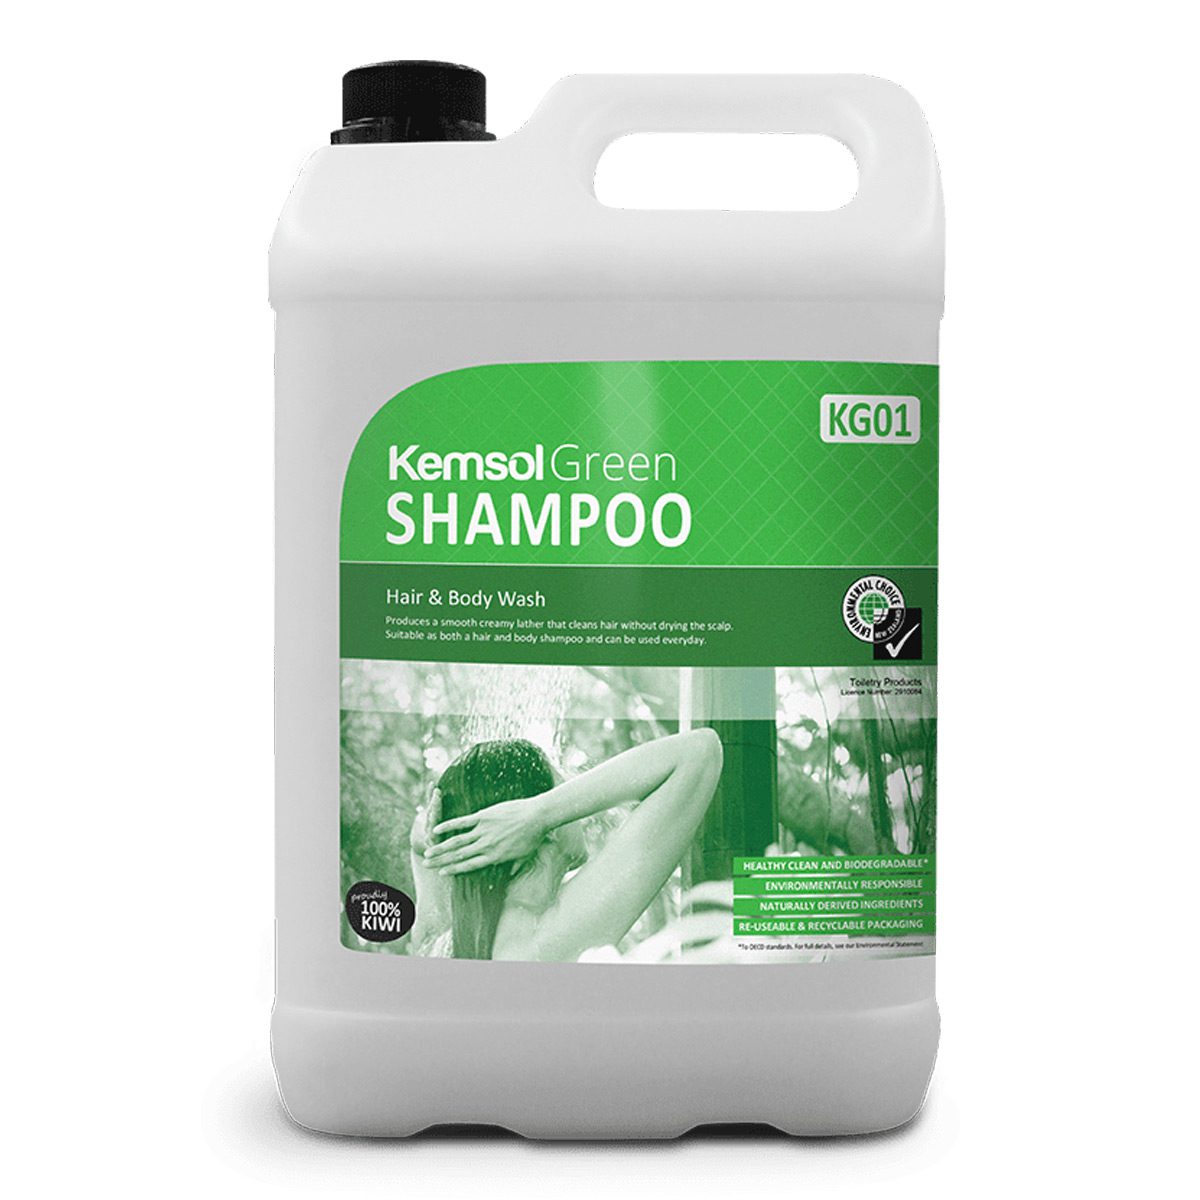 cleaning-products-environmental-kemsol-green-shampoo-5L-litre-soft-on-hair-gentle-on-skin-smooth-creamy-lather-cleans-without-drying-scalp-leaves-soft-floral-fragrance-vjs-distributors-KSHAM